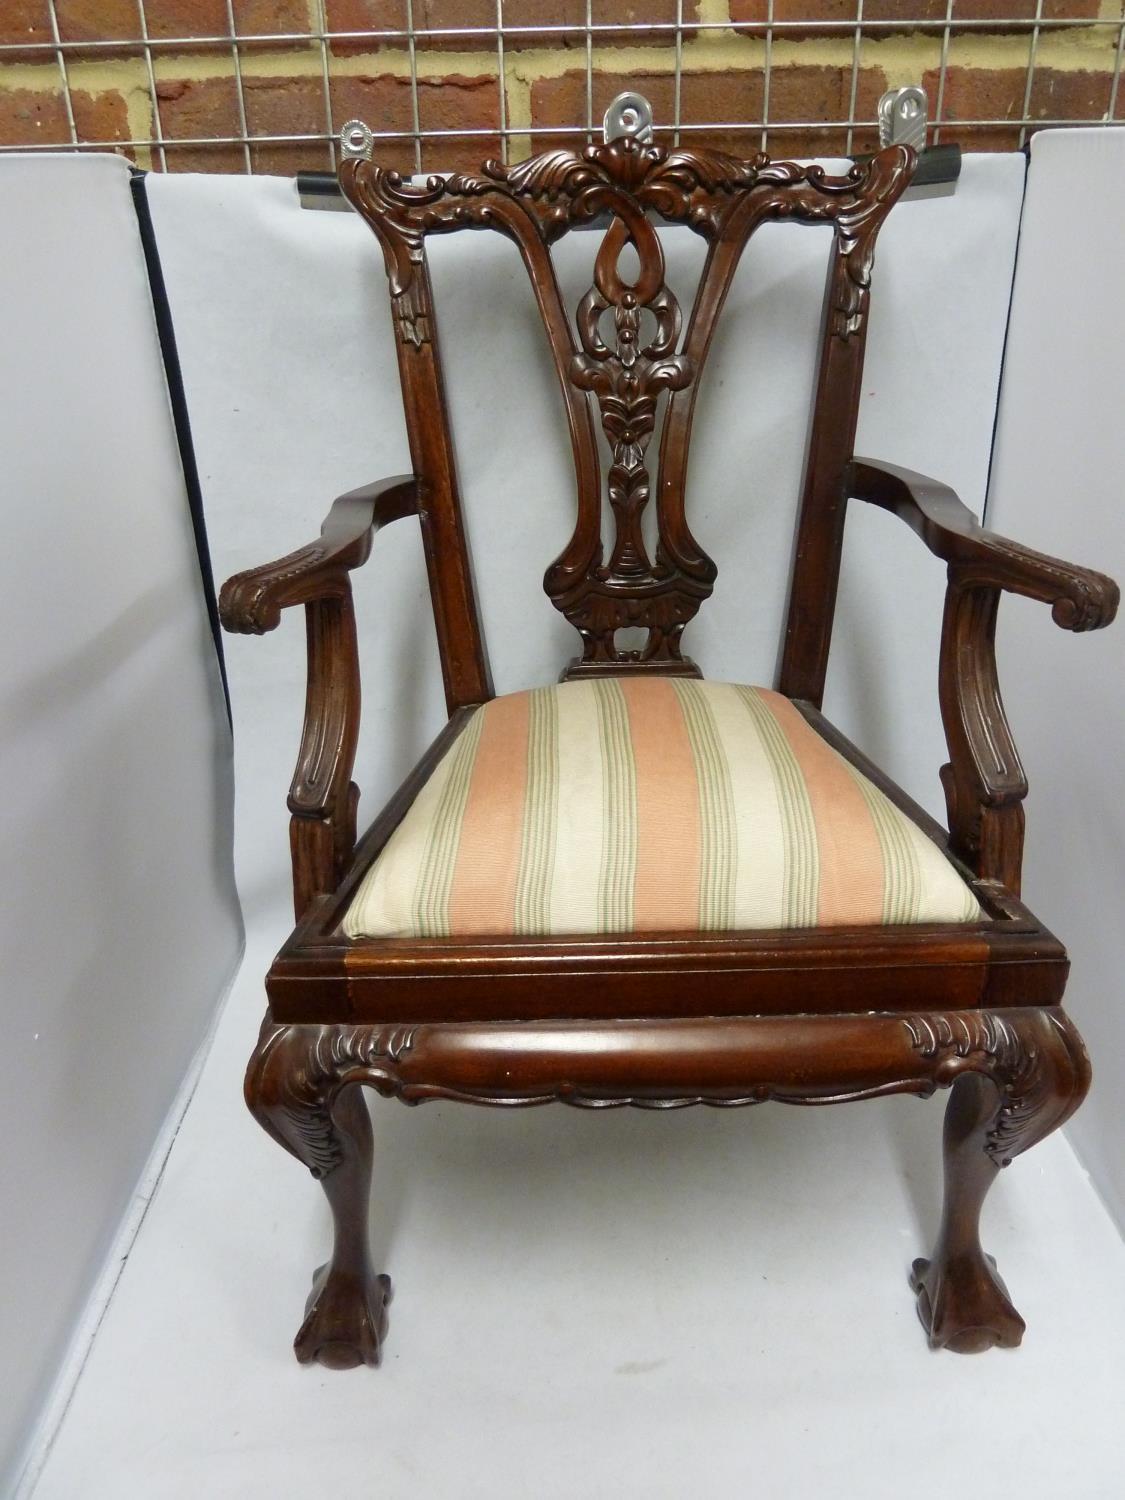 A reproduction childs/dolls chair, in Georgian style, on ball and claw feet, 50cm high